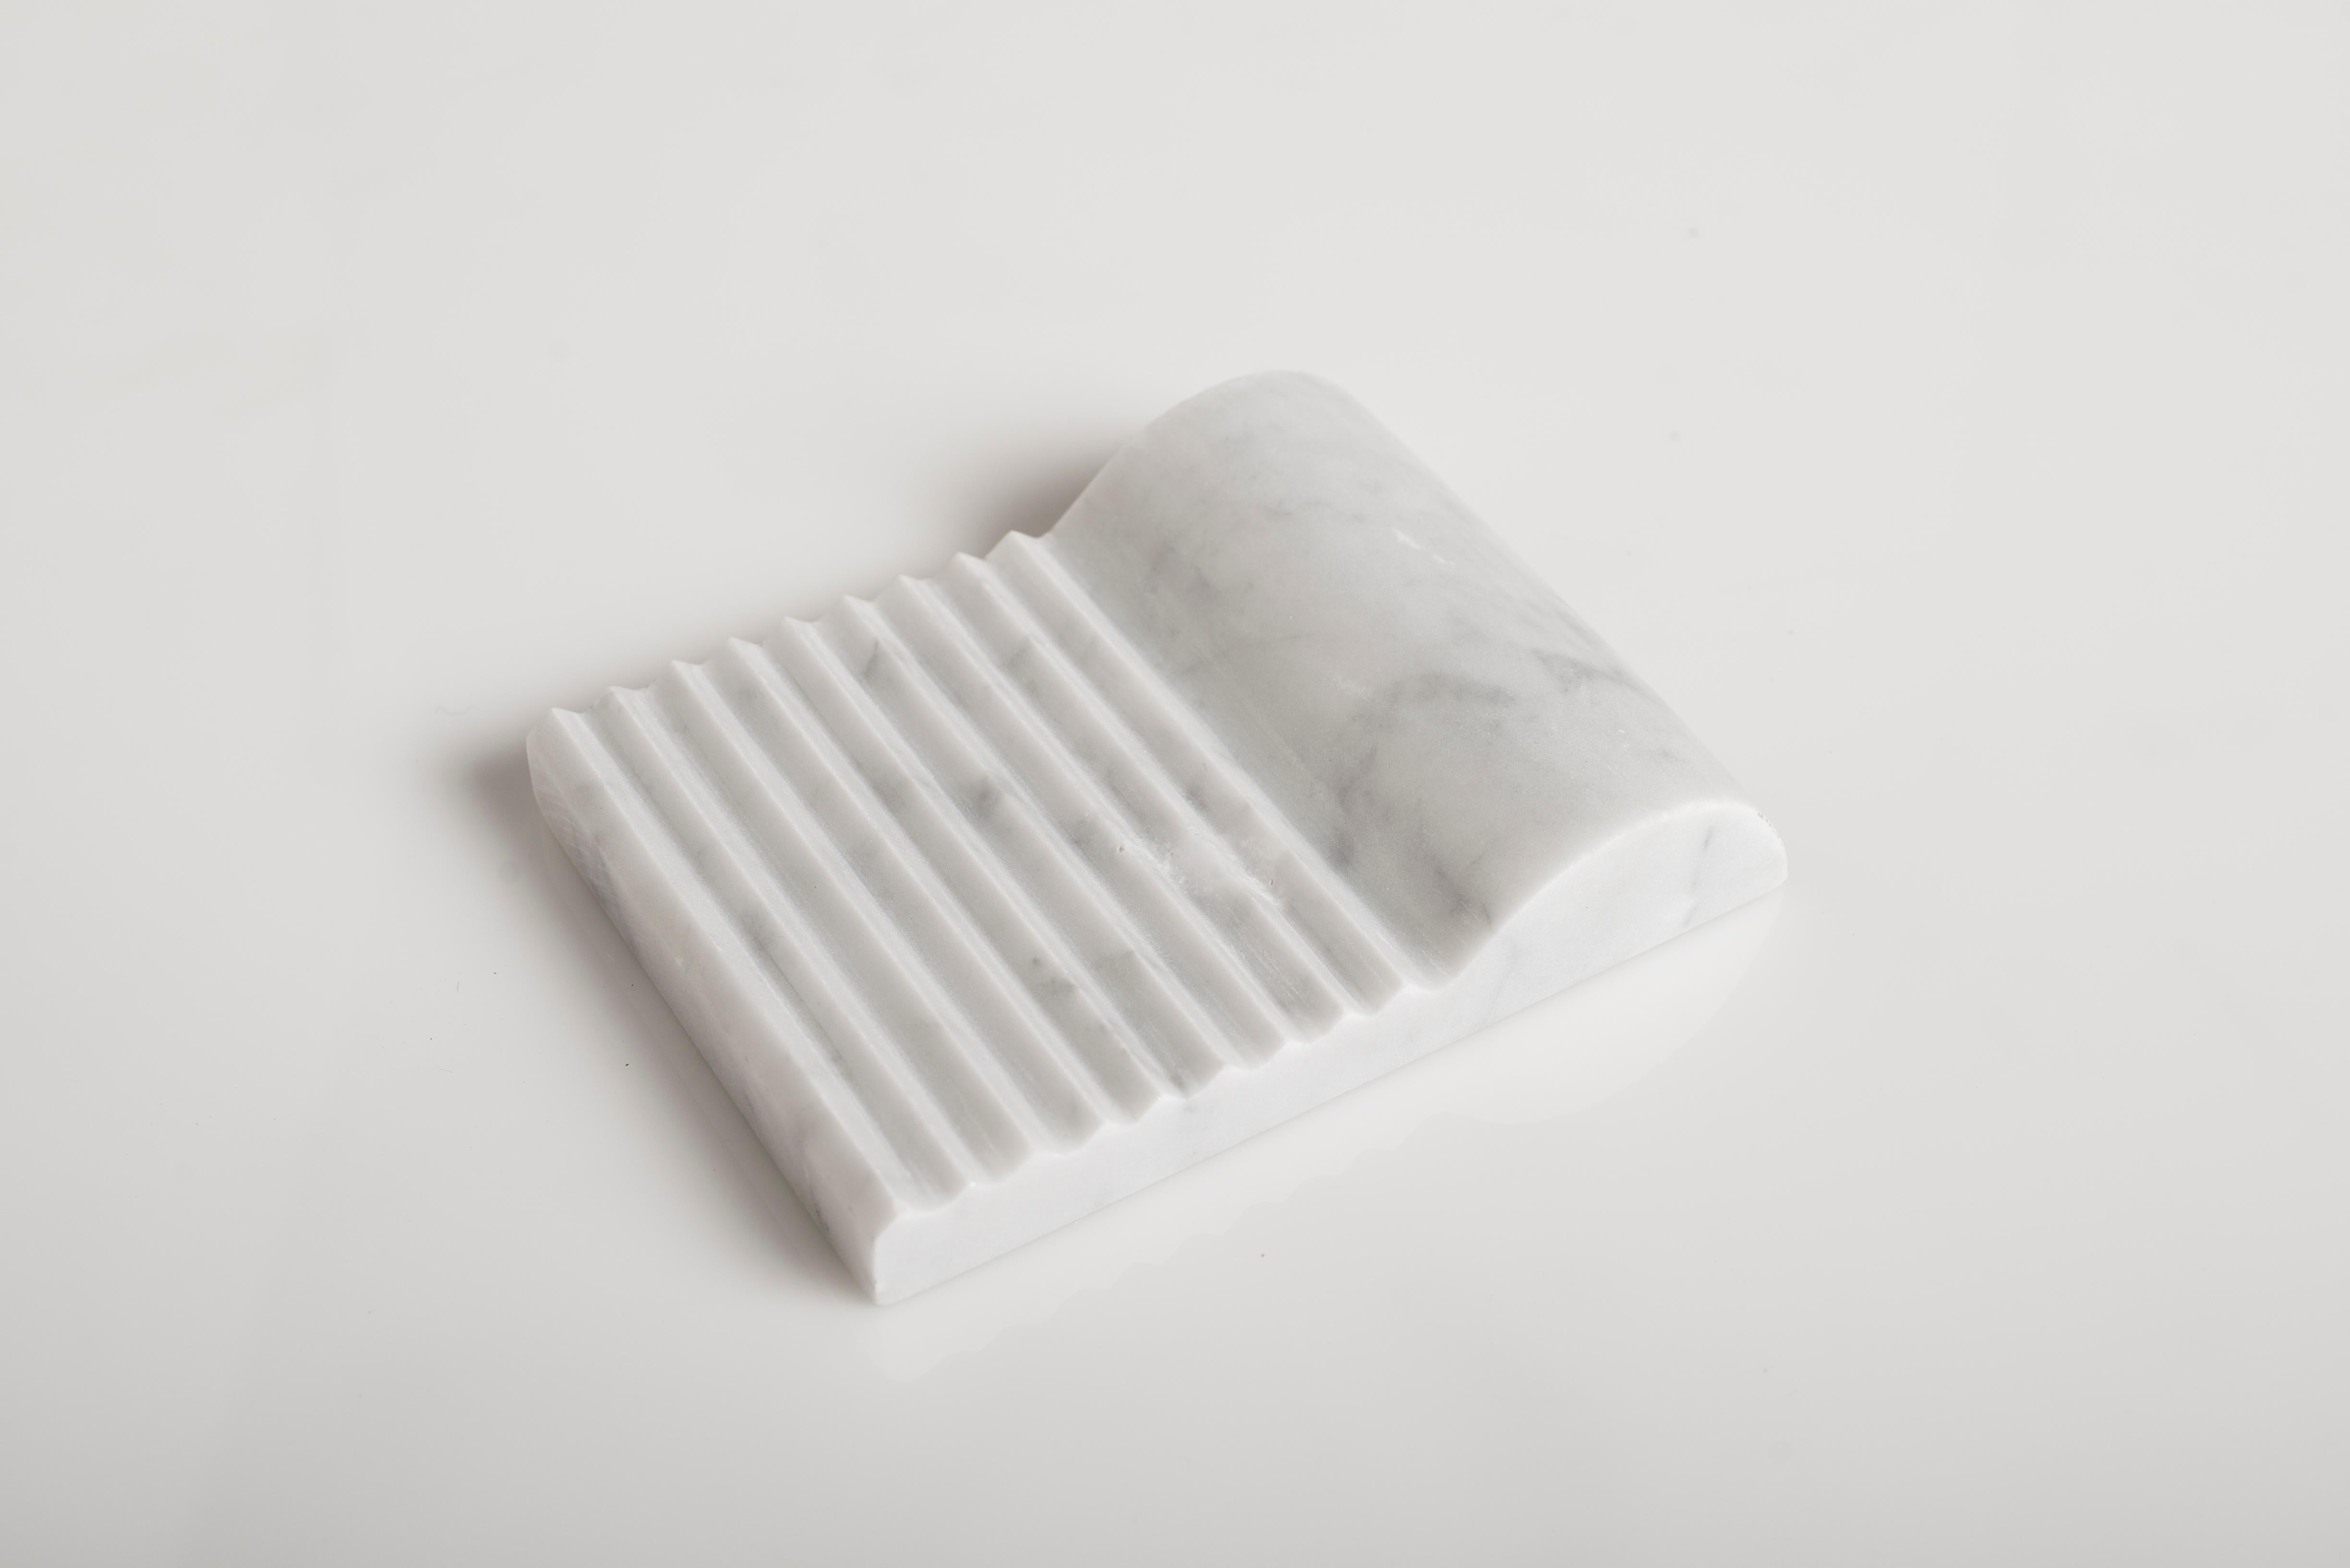 Florence sculpture by Carlo Massoud
Handmade 
Dimensions: D 15 x W 12 x H 3.5 cm 
Materials: Carrara Marble

Carlo Massoud’s work stems from his relentless questioning of social, political, cultural, and environmental norms. He often pushes his